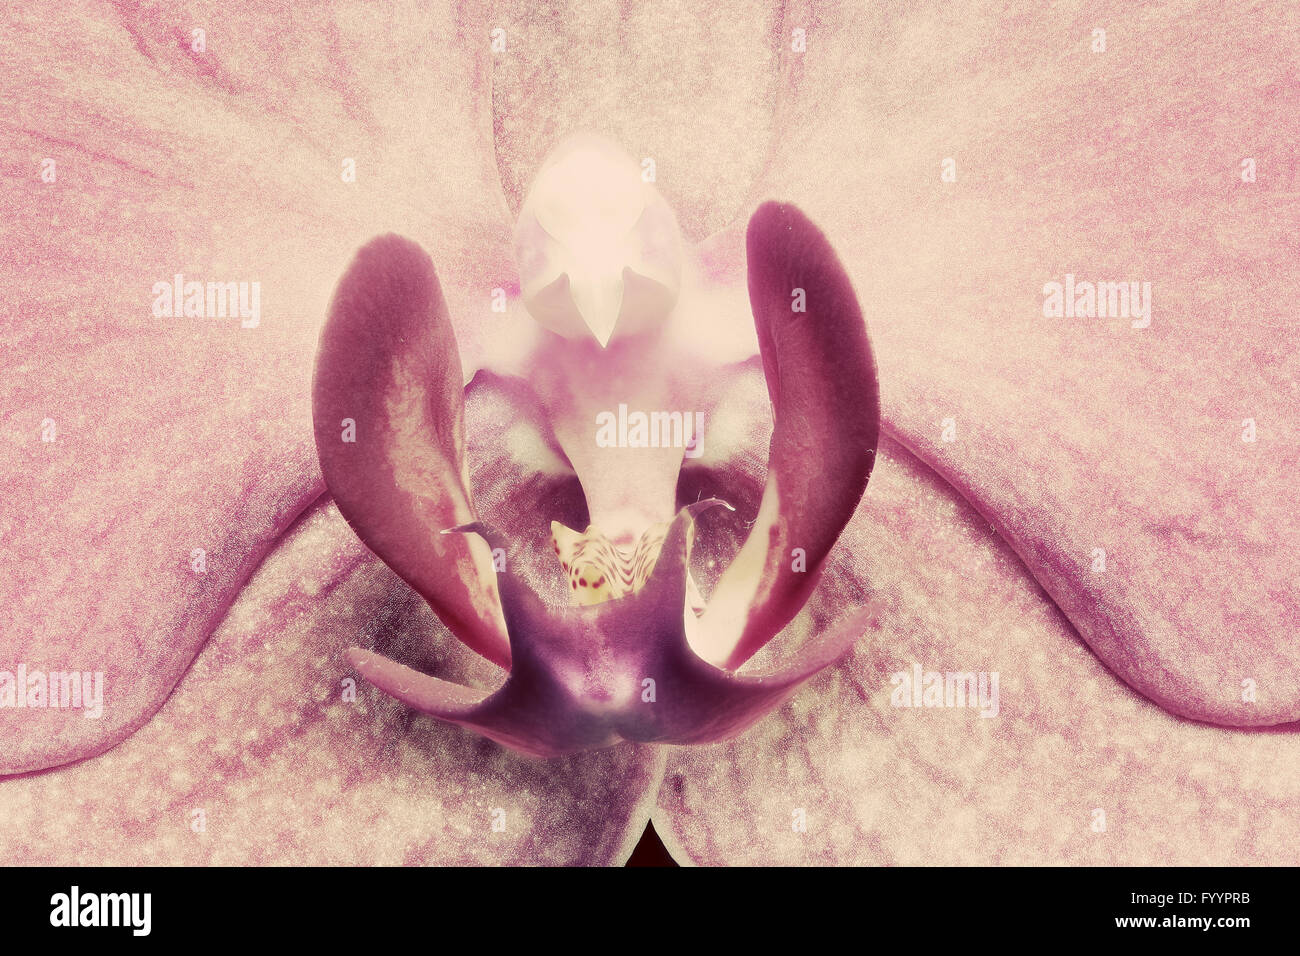 Pink Orchid Flower close-up Stockfoto